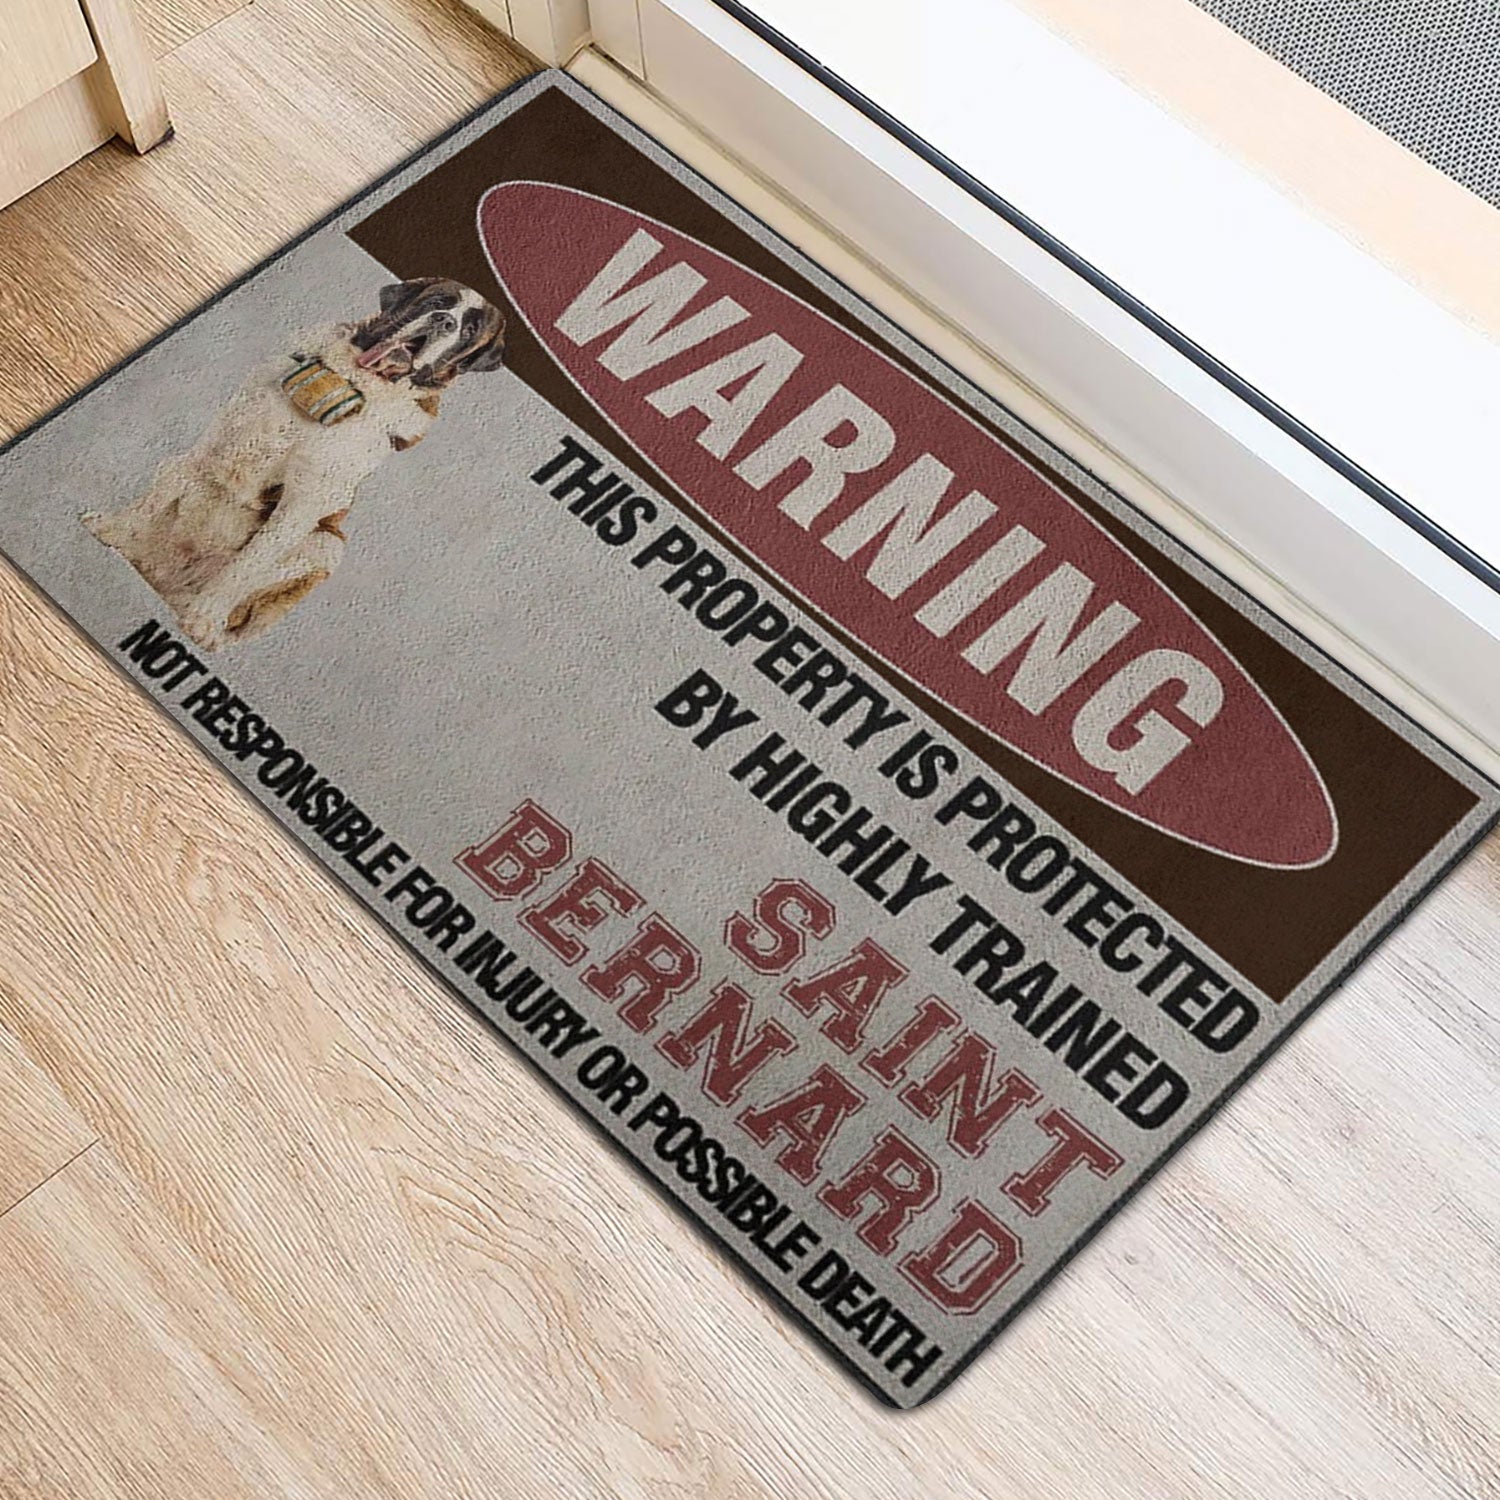 Ohaprints-Doormat-Outdoor-Indoor-This-Property-Is-Protected-By-A-Highly-Trained-Saint-Bernard-Dog-Rubber-Door-Mat-1357-